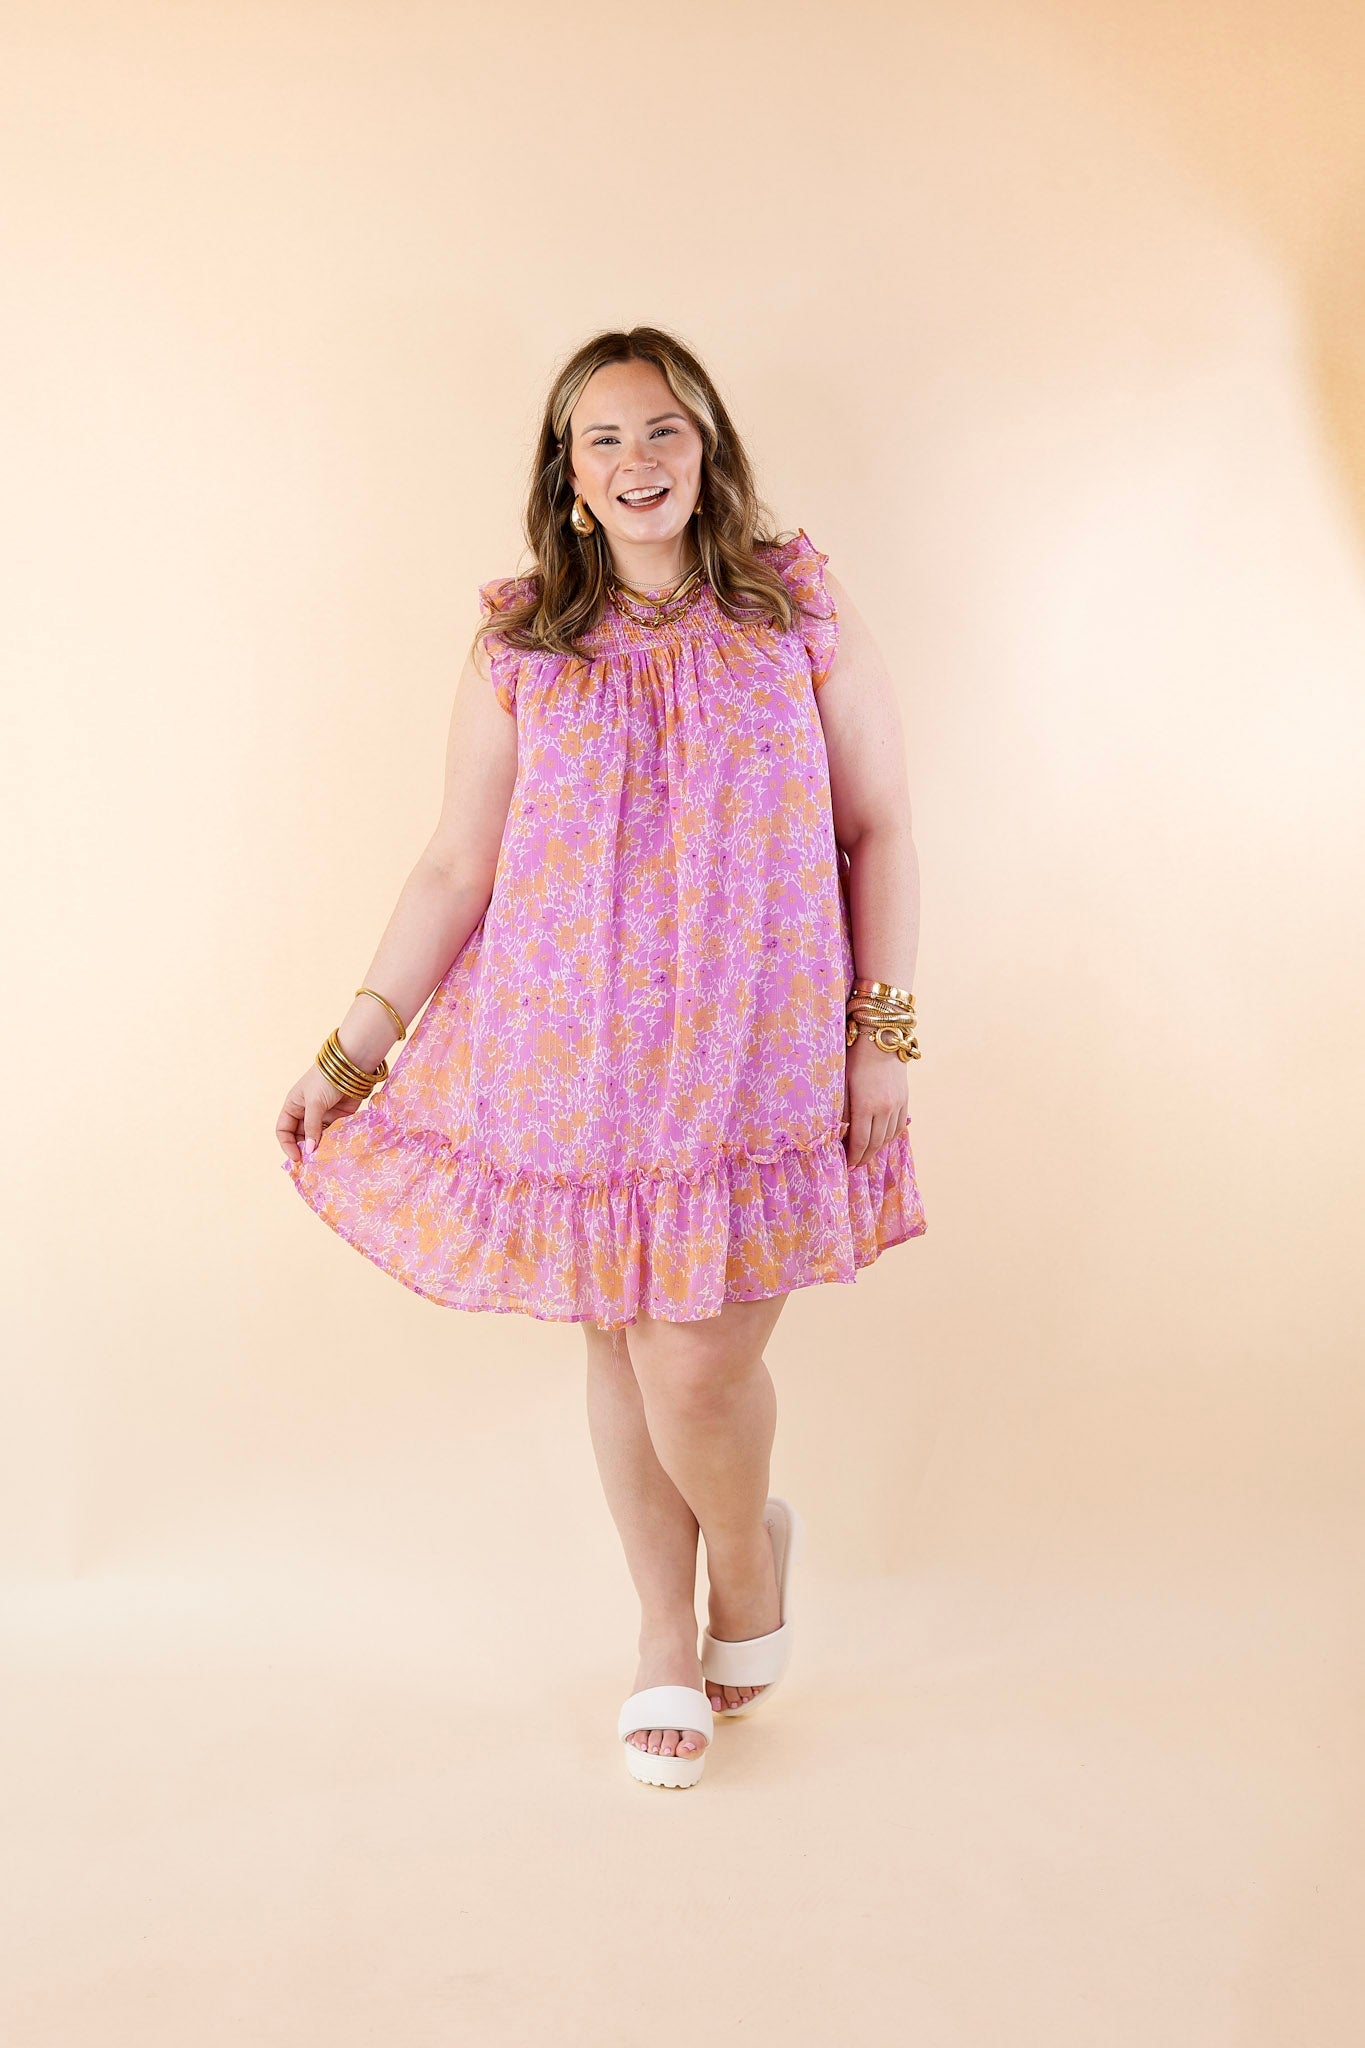 New To The Scene Floral Dress with Ruffle Cap Sleeves in Purple and Orange - Giddy Up Glamour Boutique